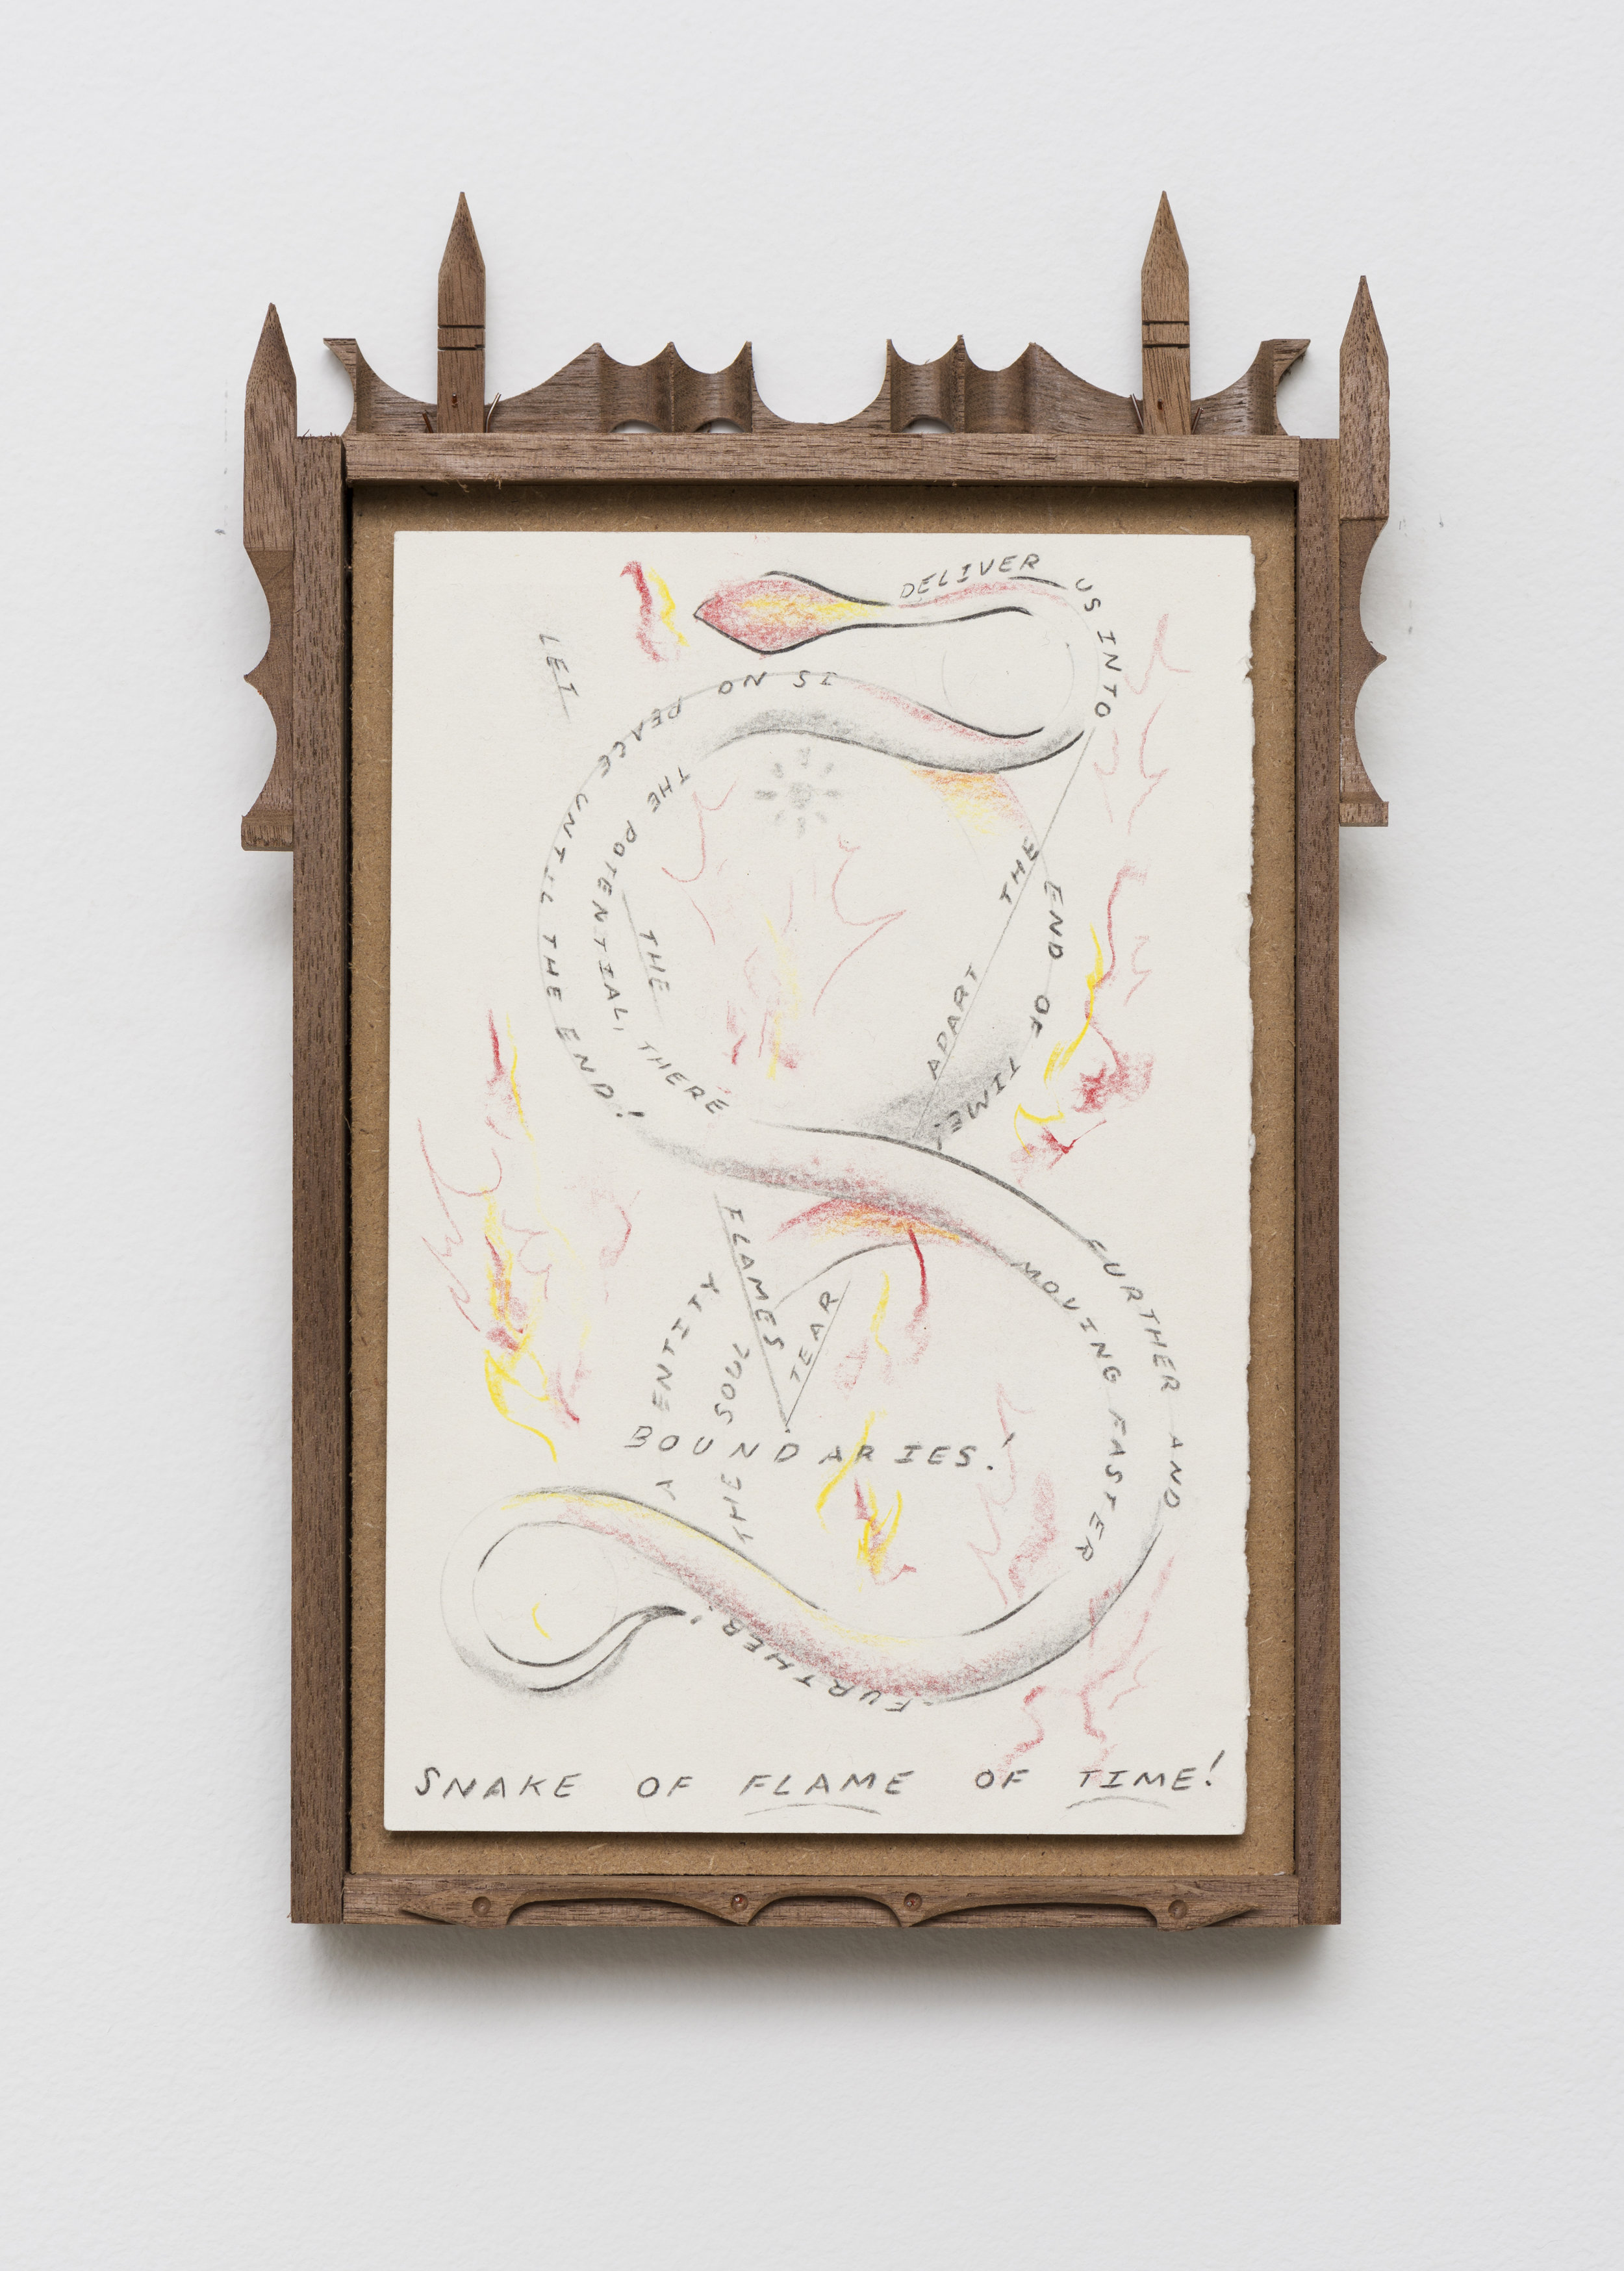   Harry Gould Harvey IV  Lost in a Combustible Ether in the Flames of TIme   2019 Pencil on paper, carved walnut frame 11 x 6.75 in     